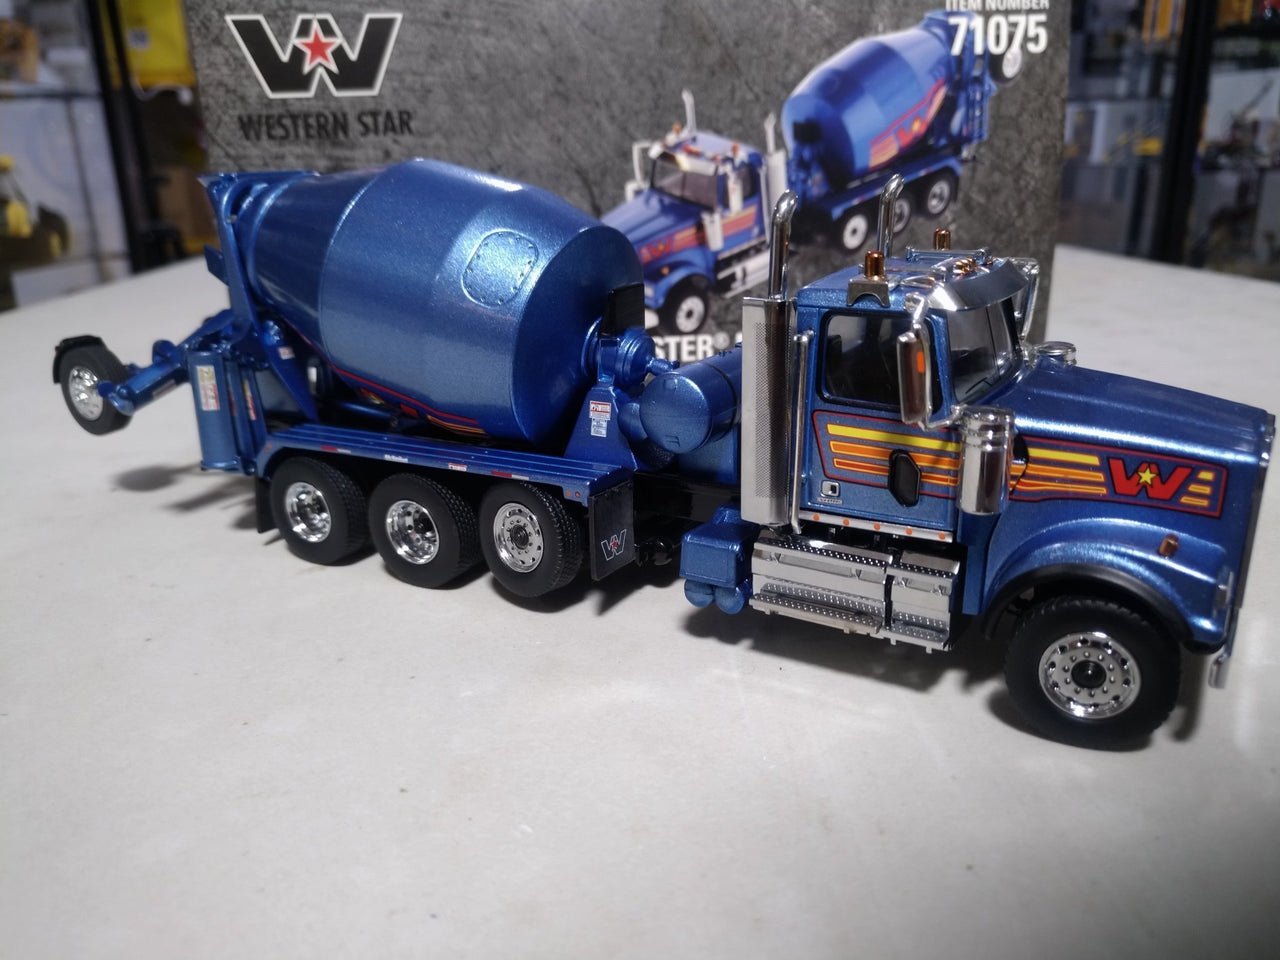 71075 Western Star 4900 Mixer 1:50 Scale